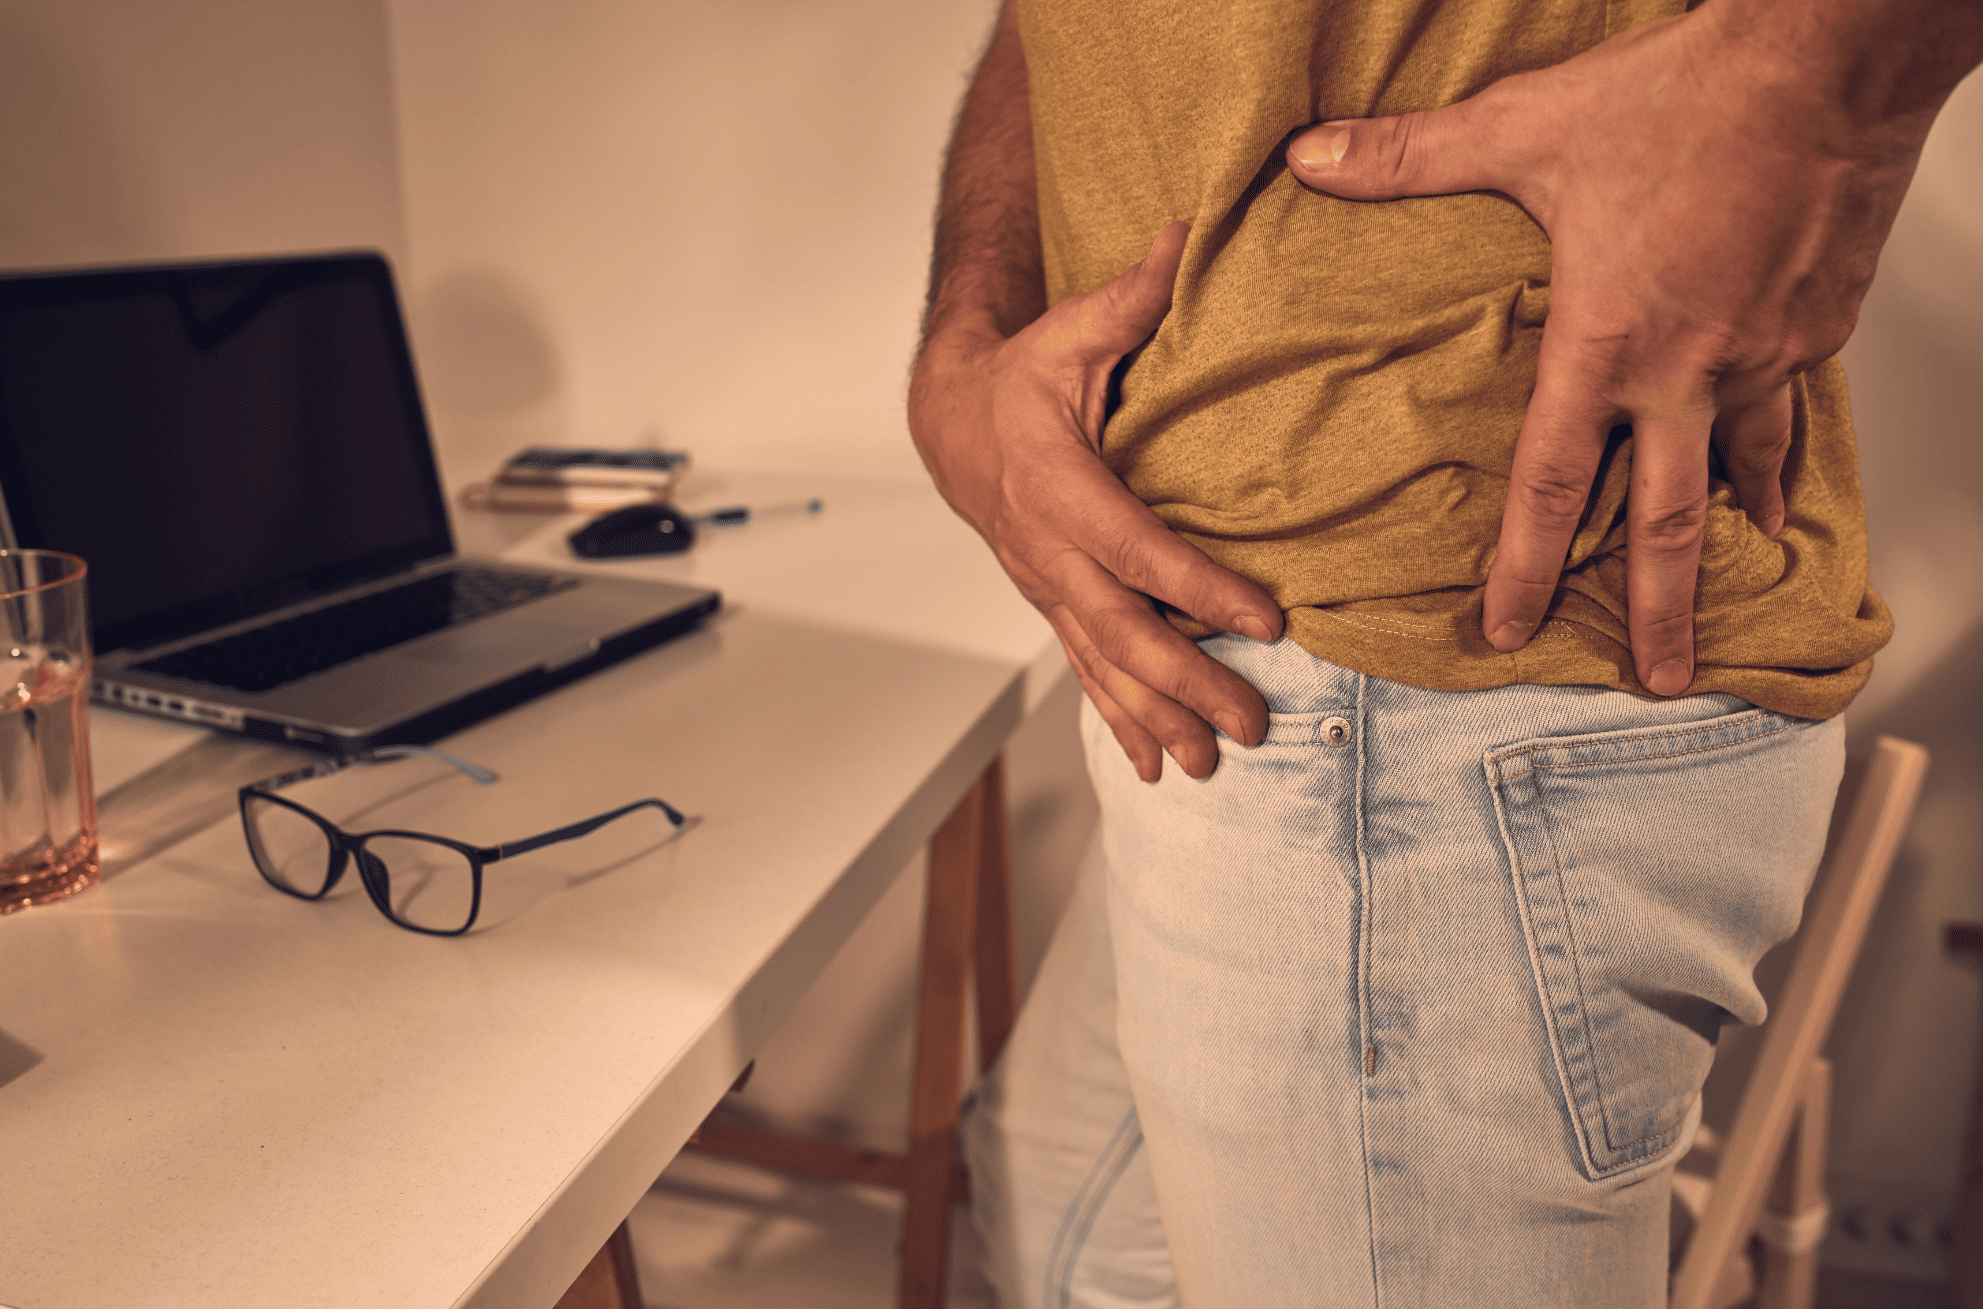 Use These 3 Essential Stretches To Relieve Sciatica Pain